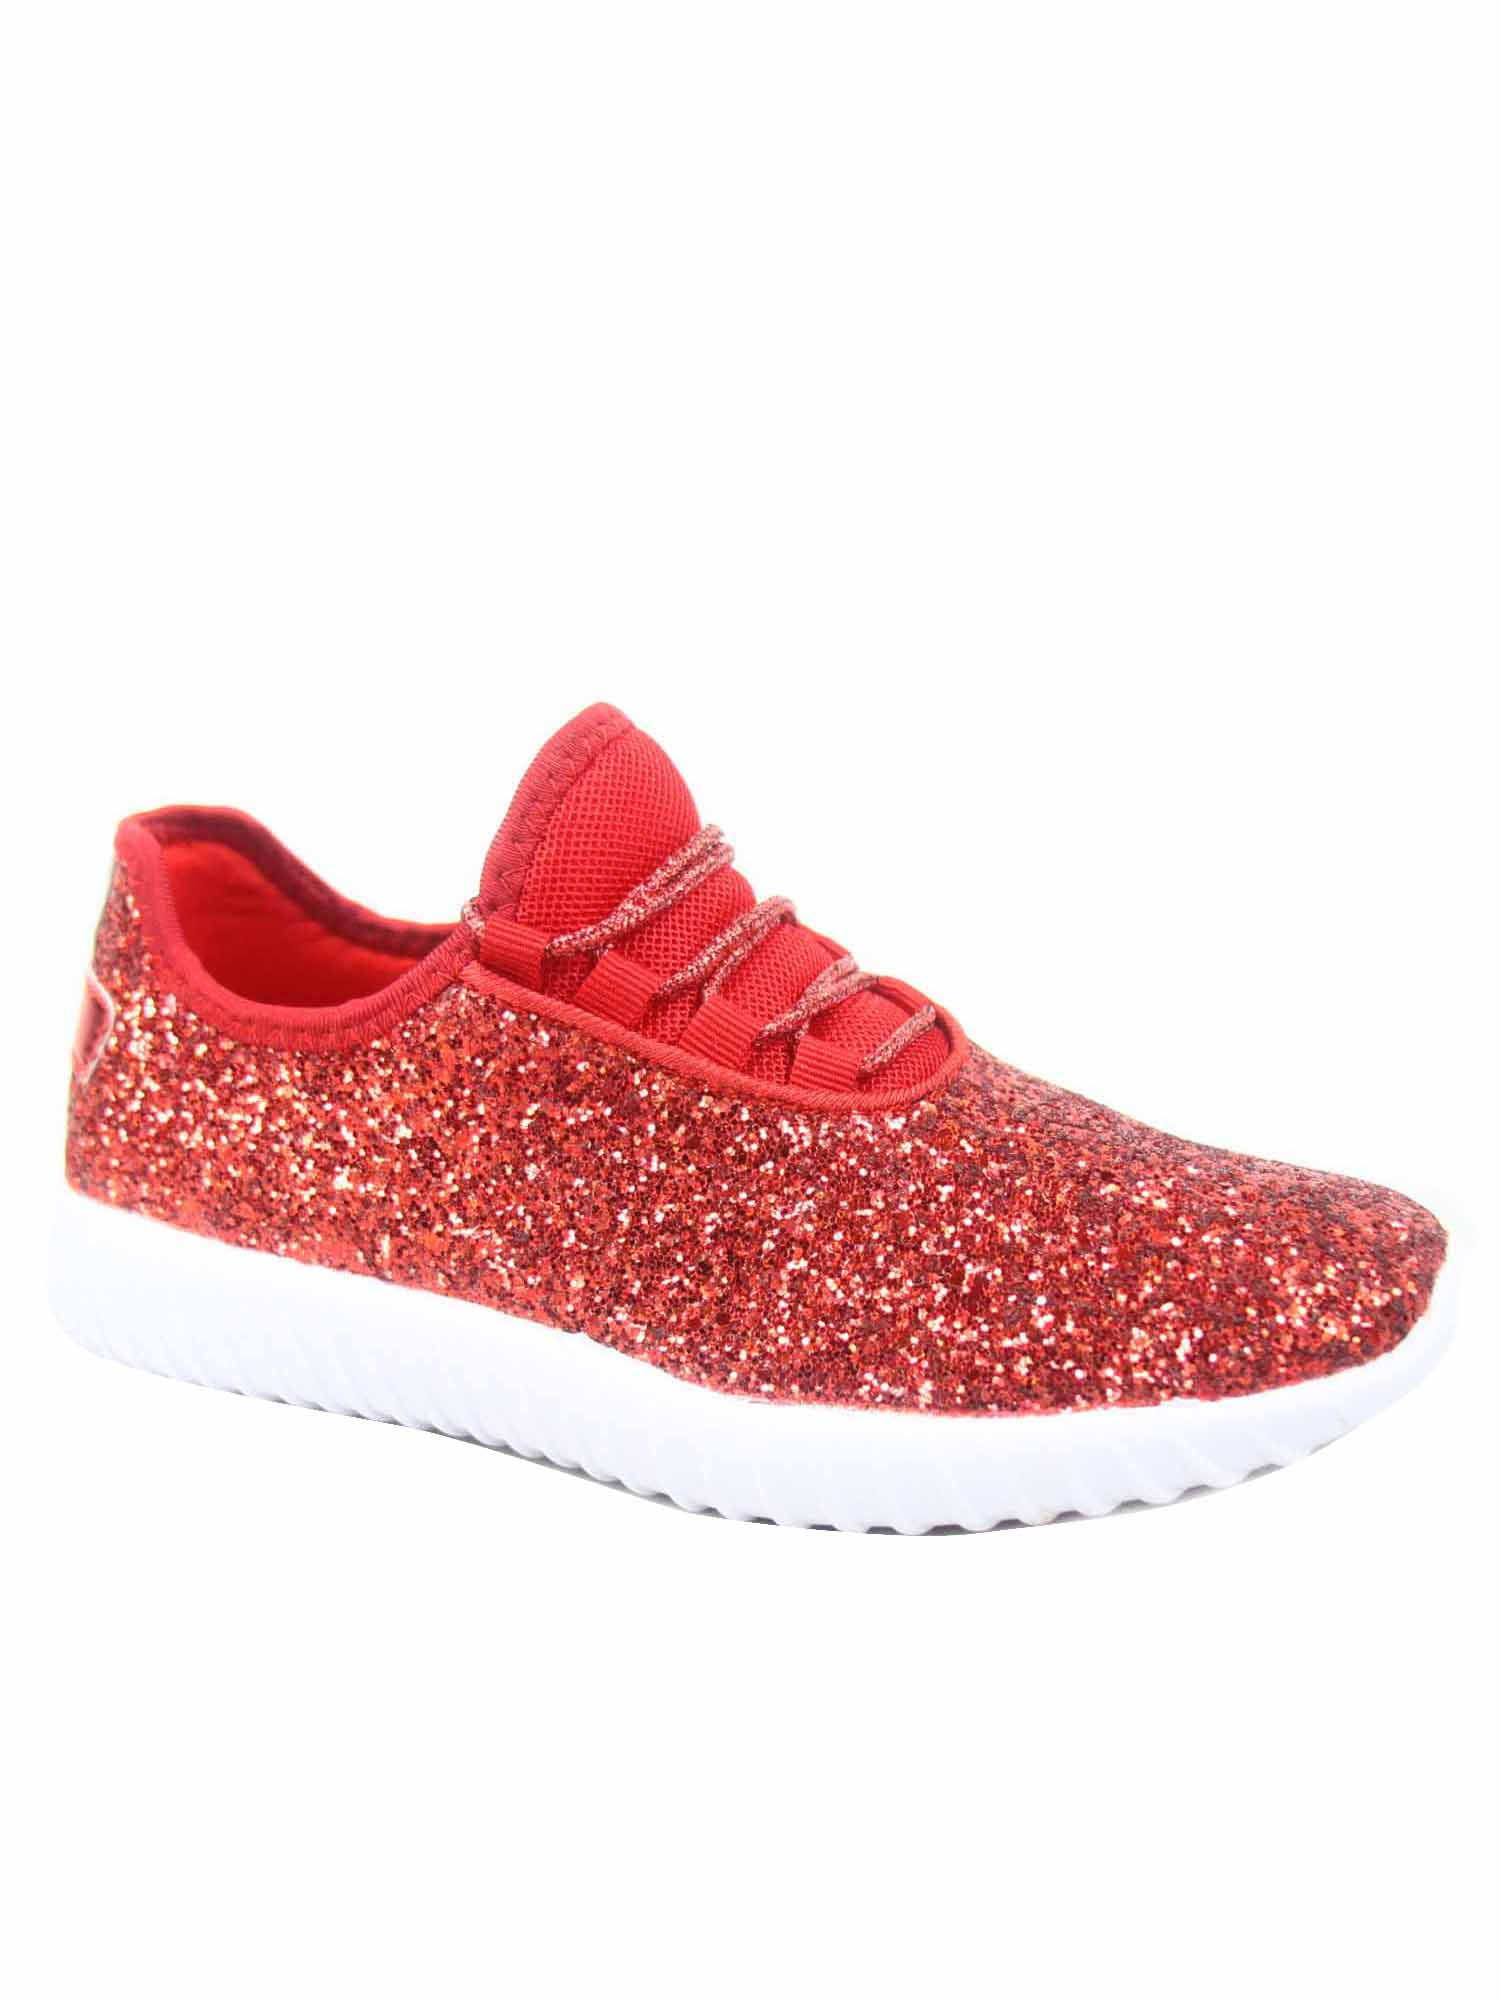 red glitter tennis shoes womens